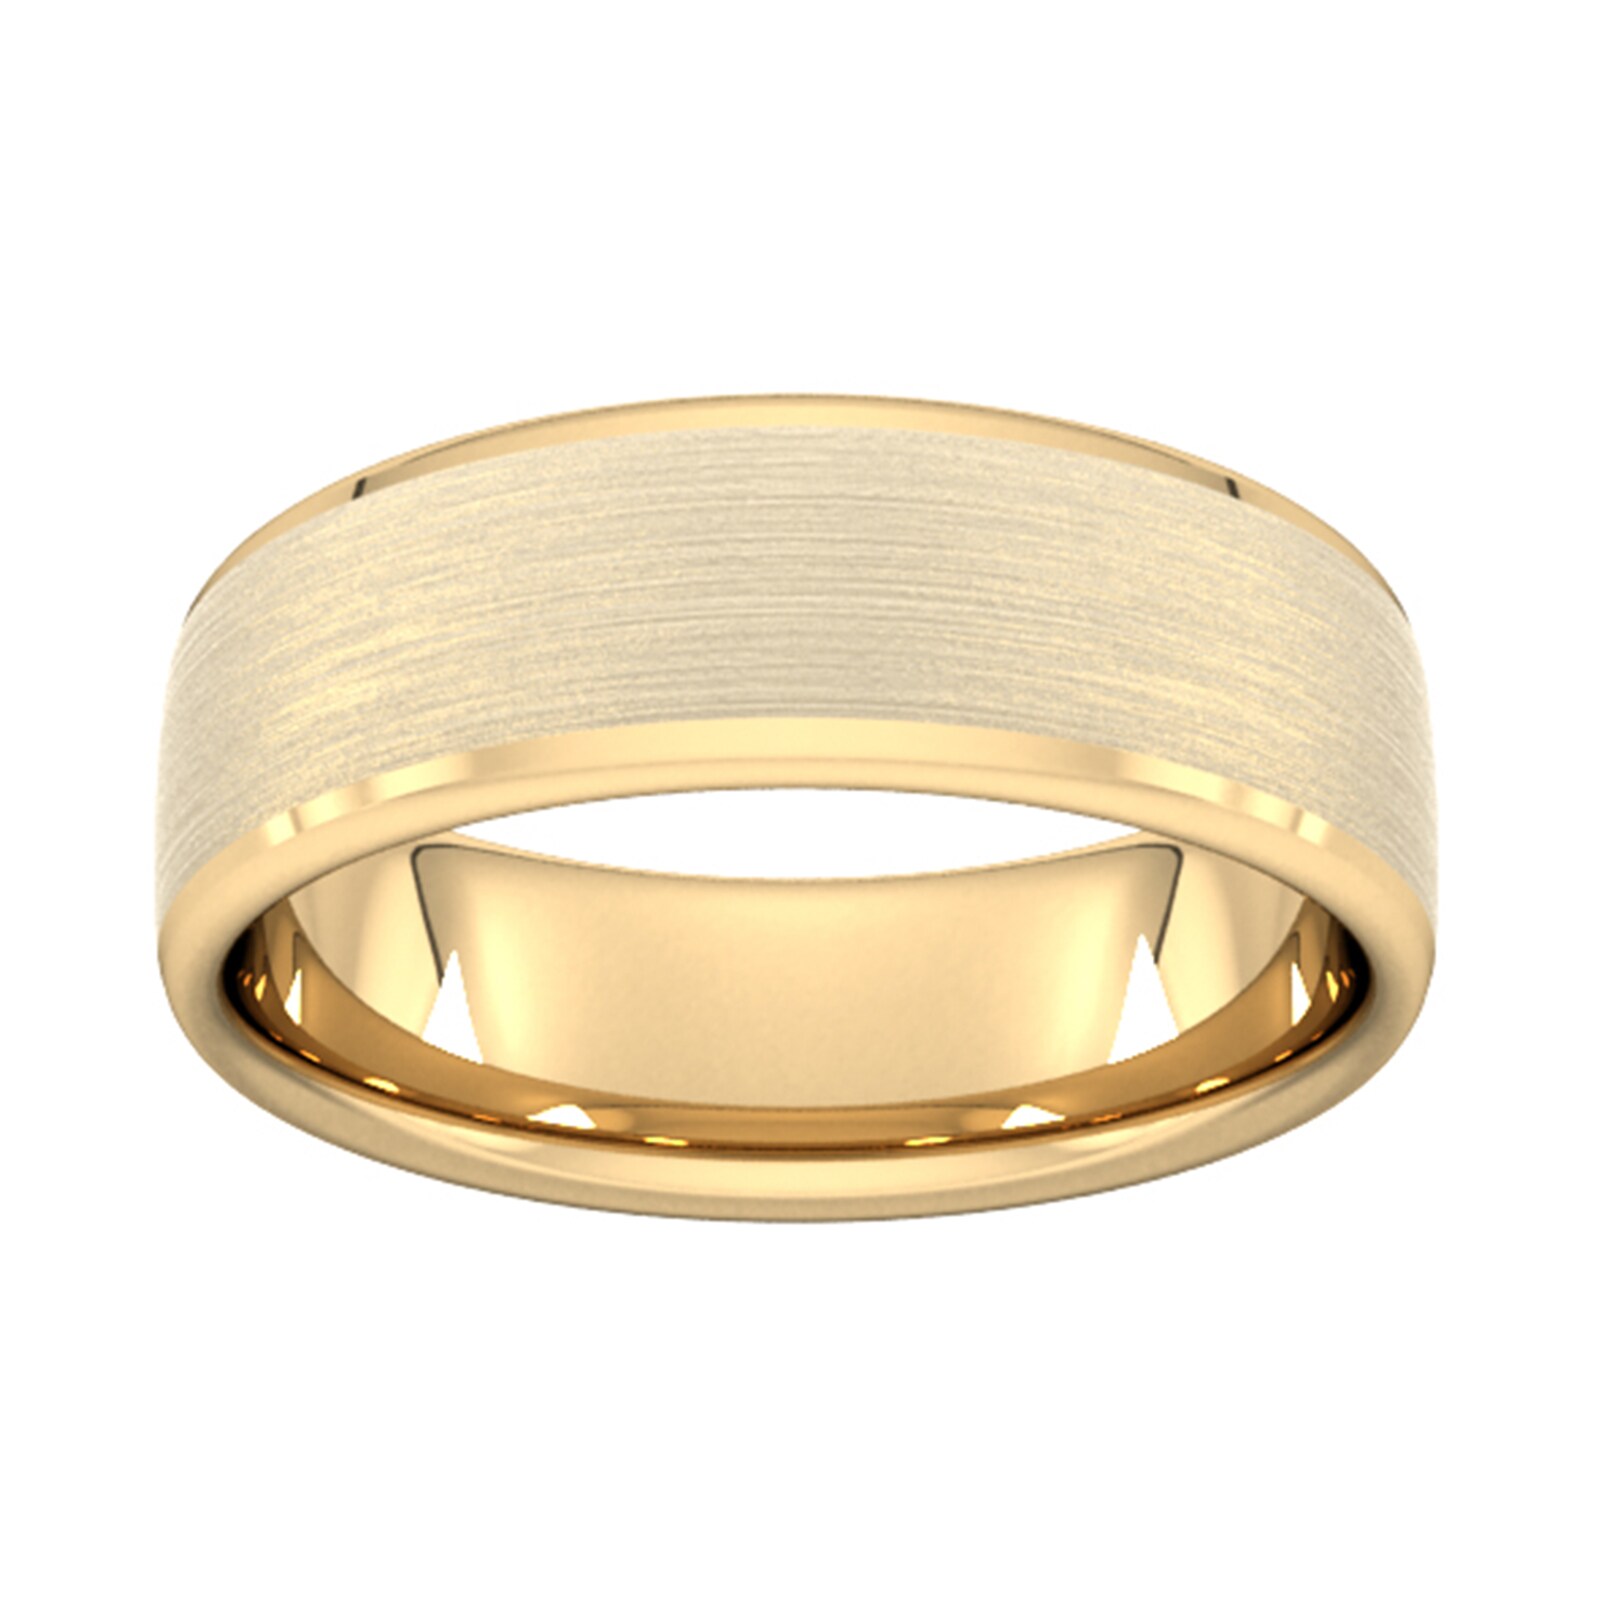 7mm Slight Court Extra Heavy Polished Chamfered Edges With Matt Centre Wedding Ring In 18 Carat Yellow Gold - Ring Size K